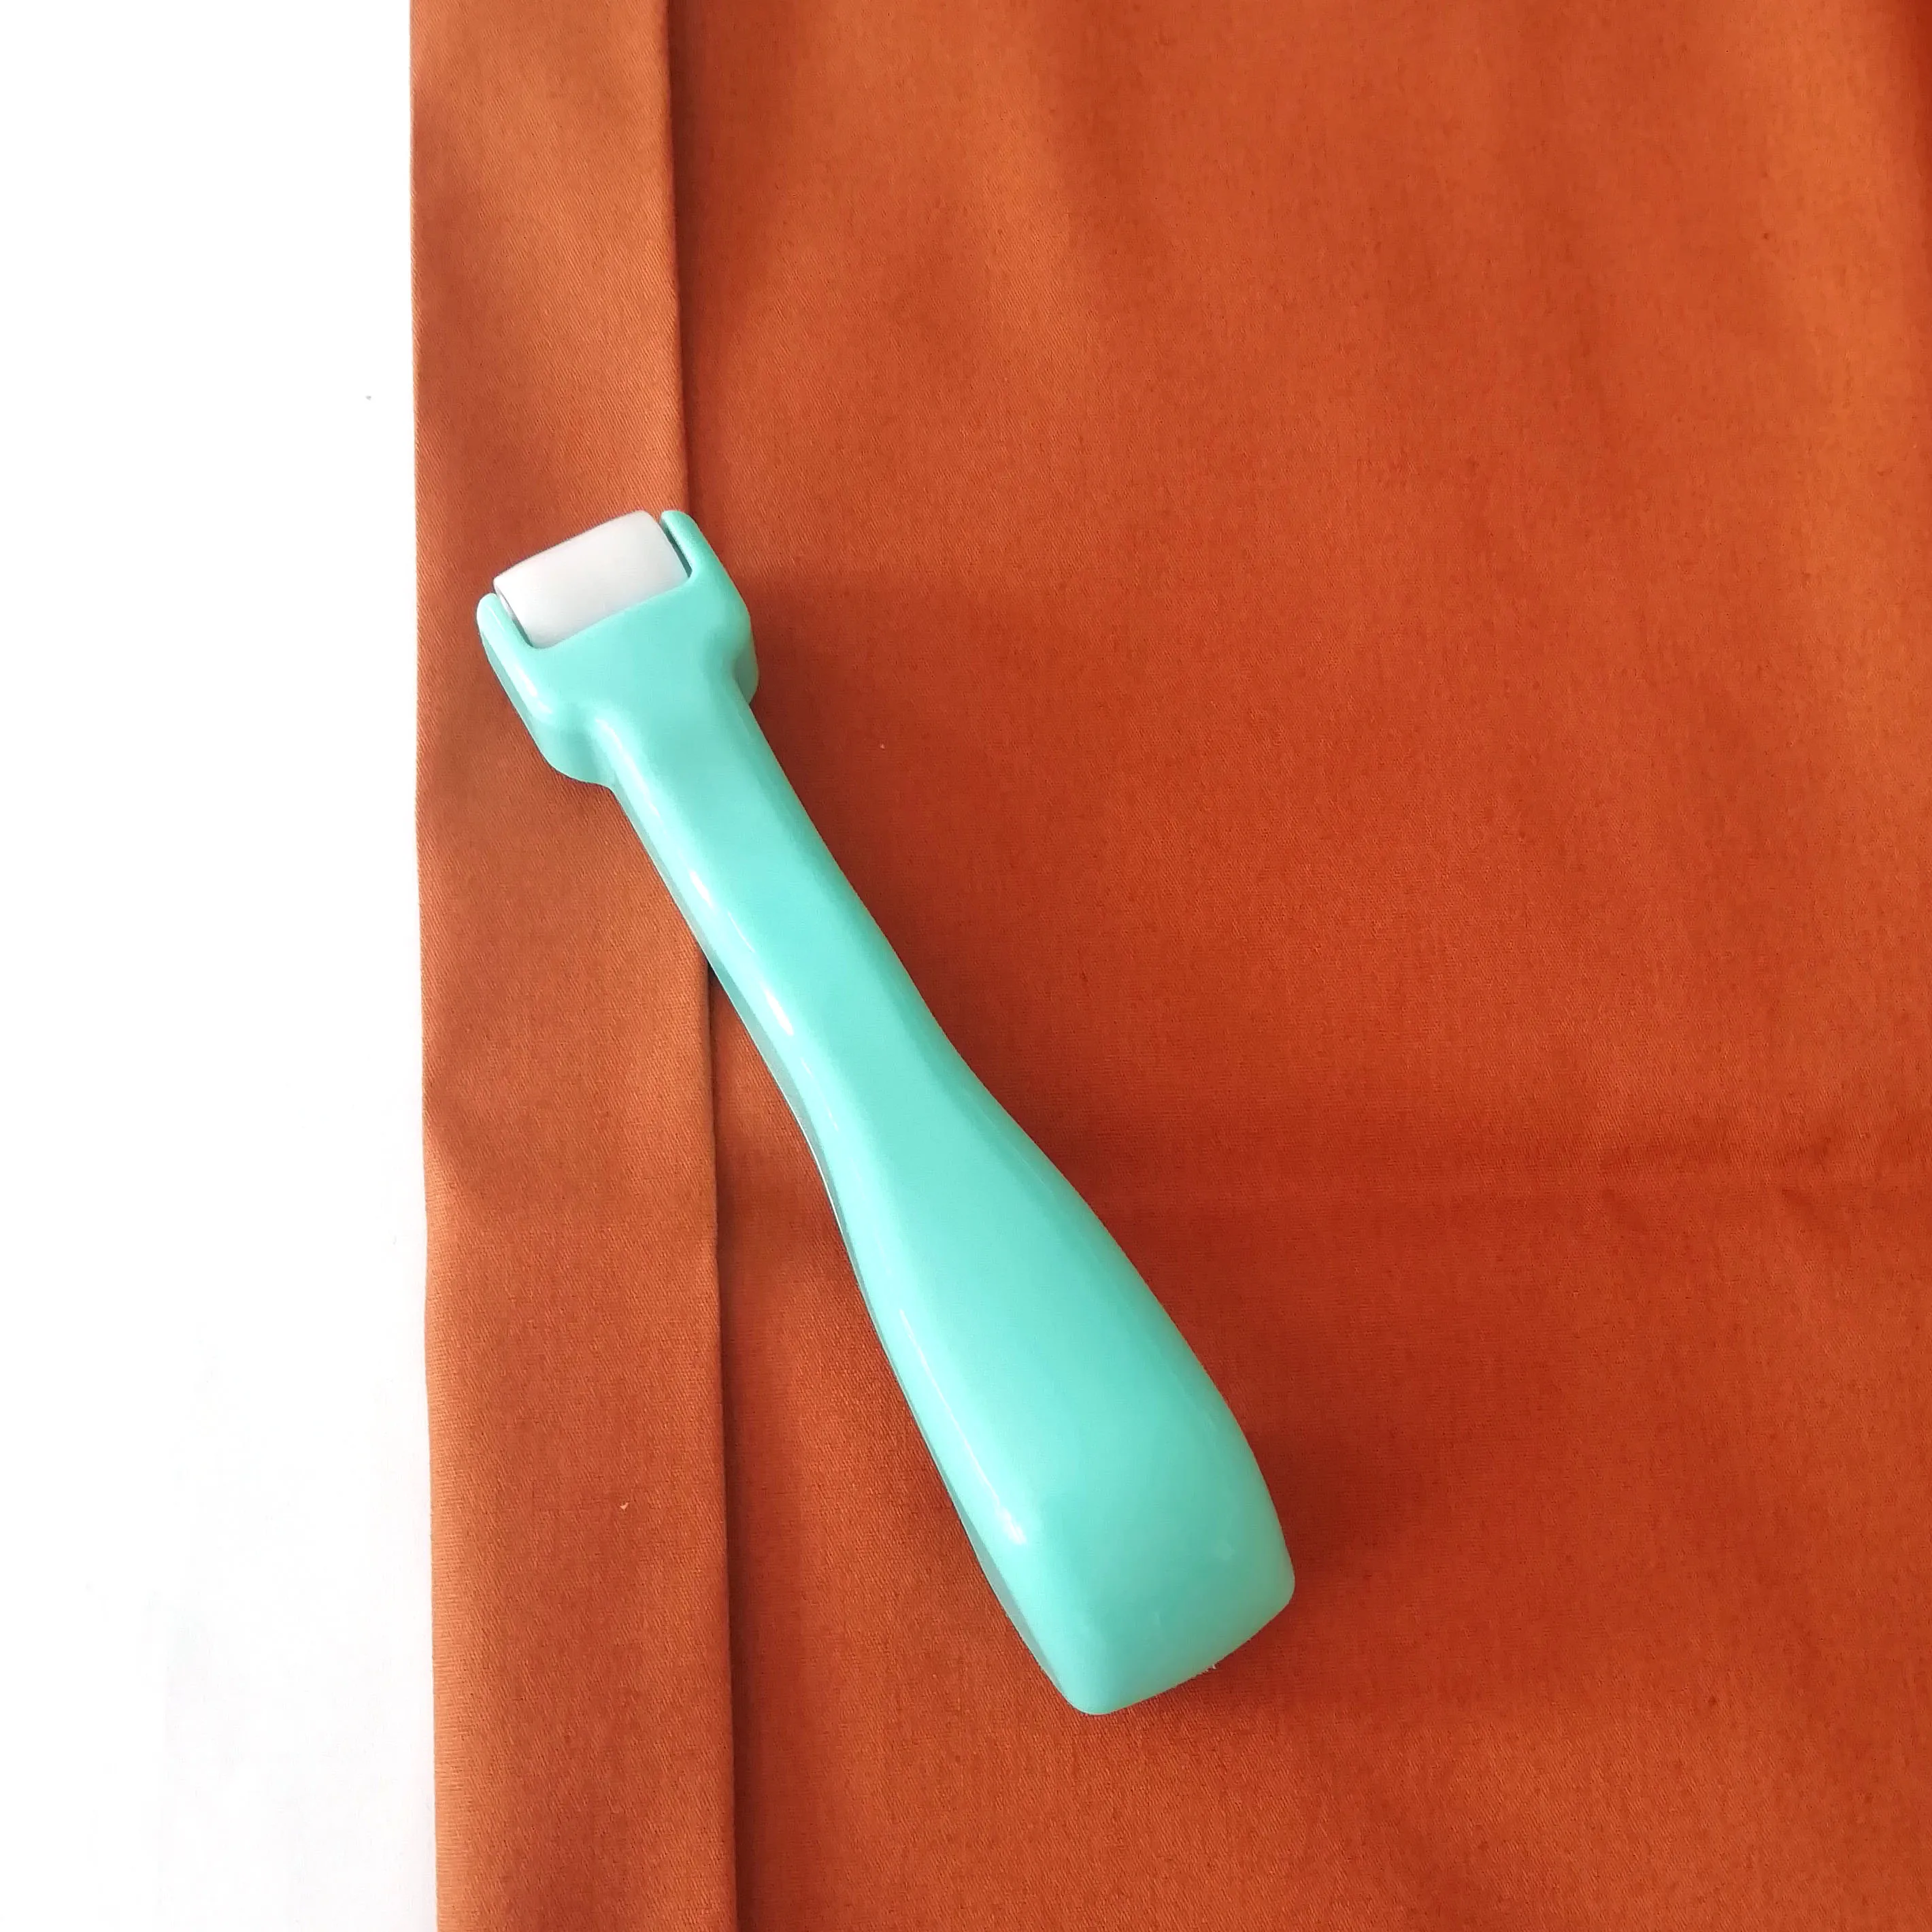 Sewing Tools Roll & Press Clover to quickly press seams that won't pull stress